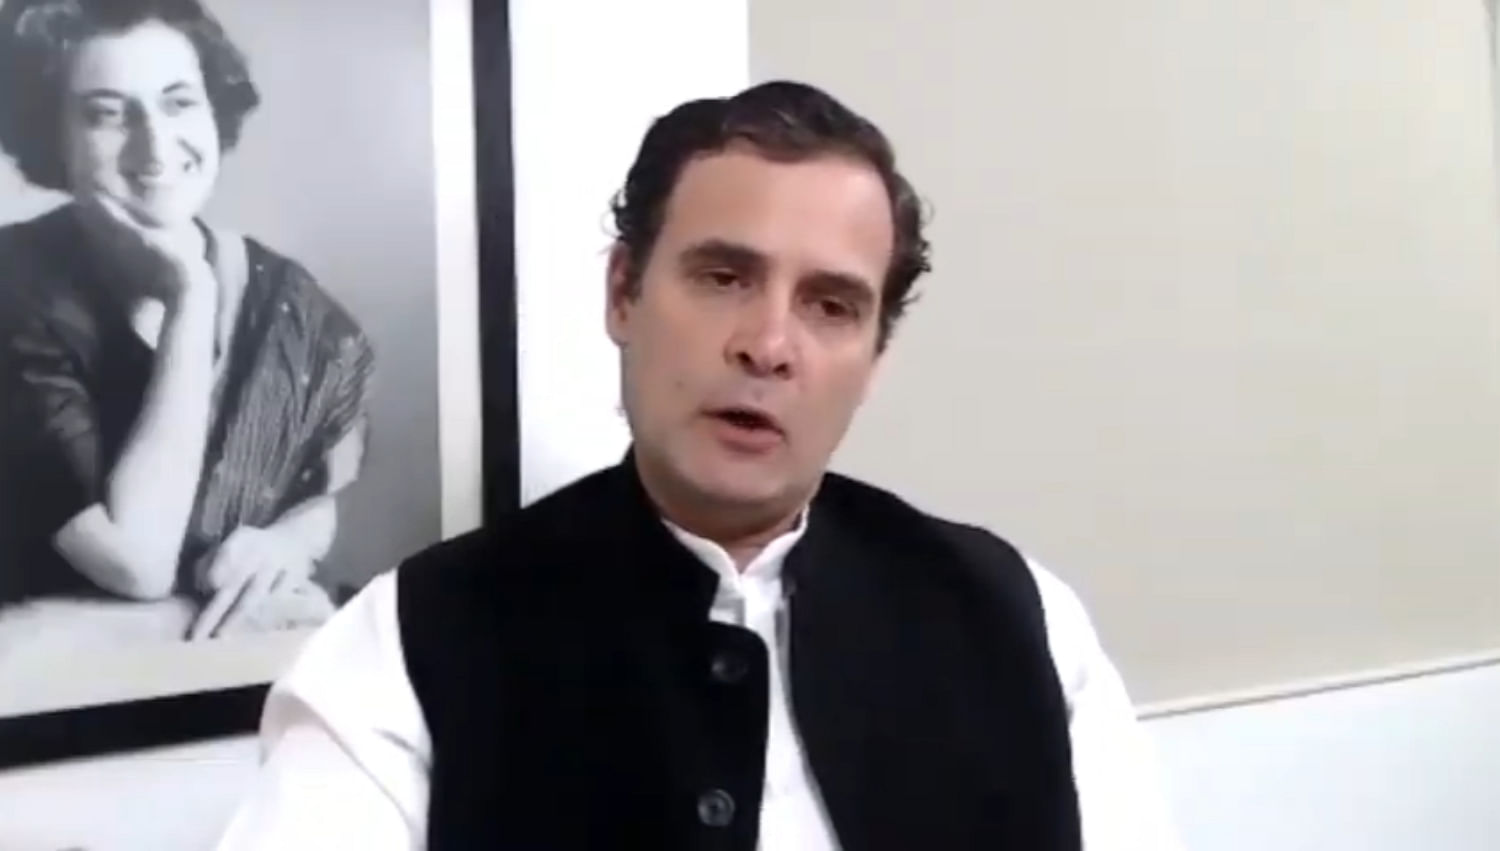 Rahul Gandhi and the Grameen Bank founder will challenge the wisdom of pushing millions to migrate to urban areas, and examine the role of technology in fuelling an economic revolution in rural areas. Credit: Youtube Screengrab